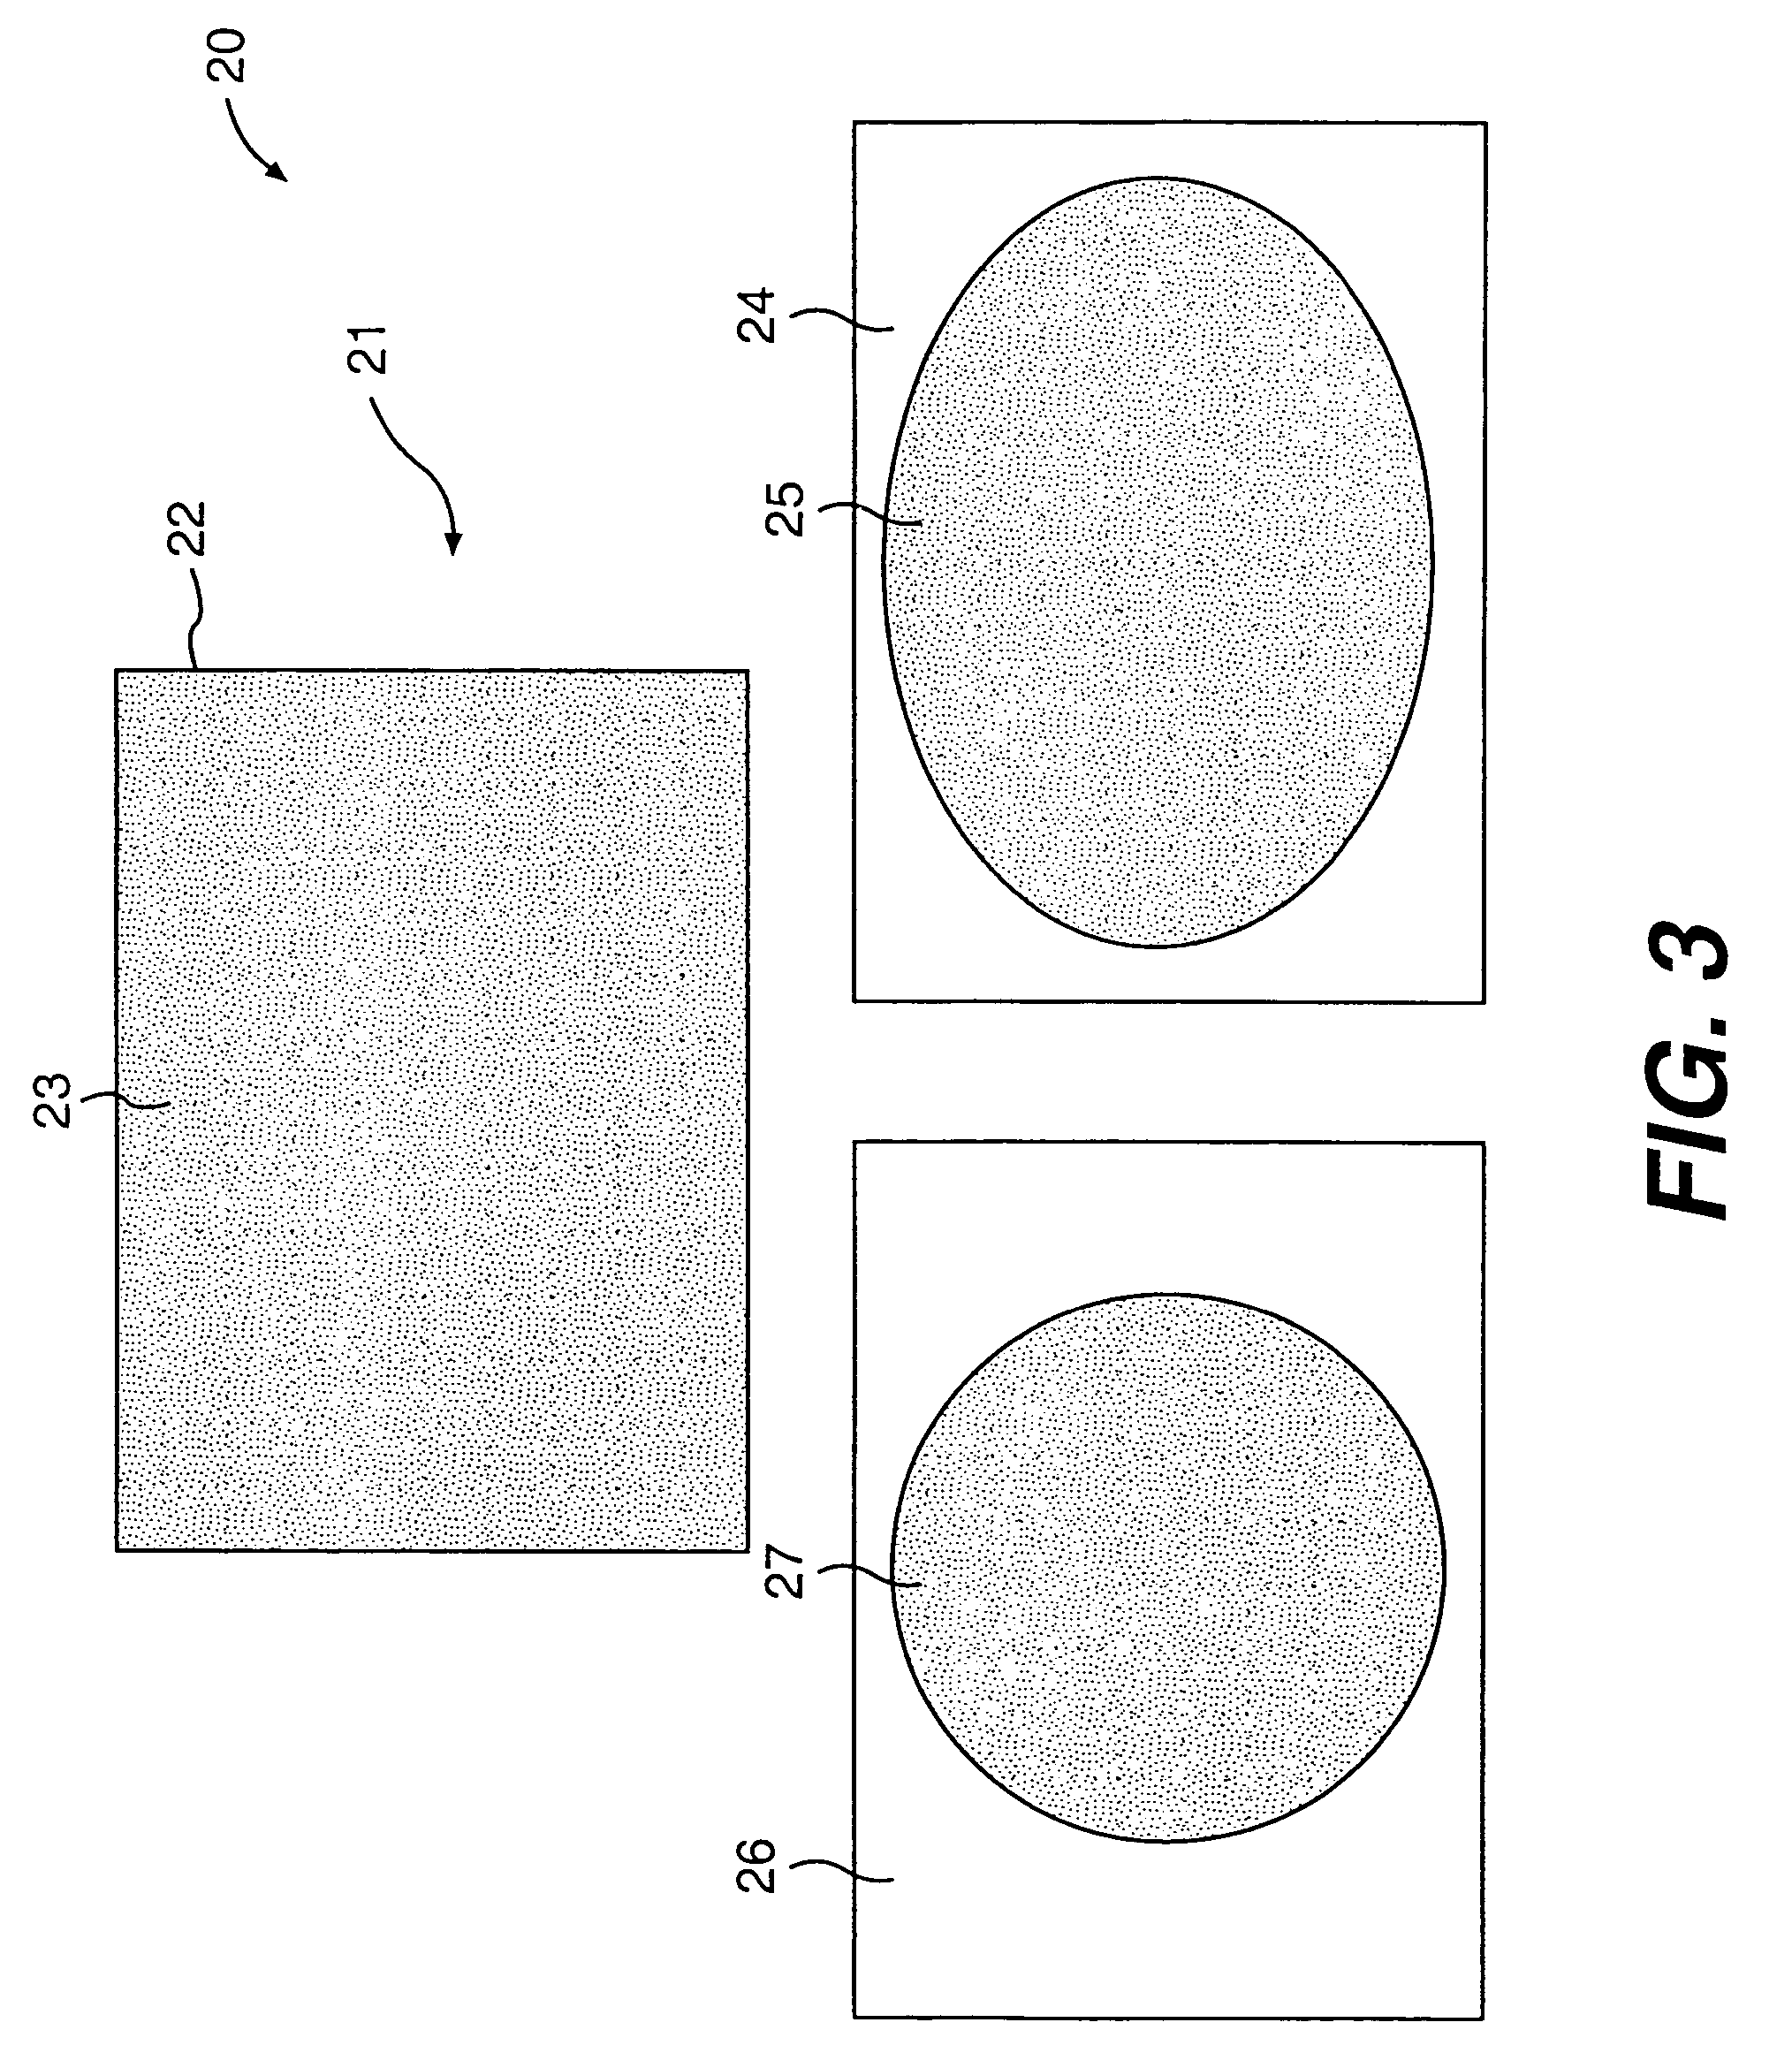 Enhanced multi-ply tissue products